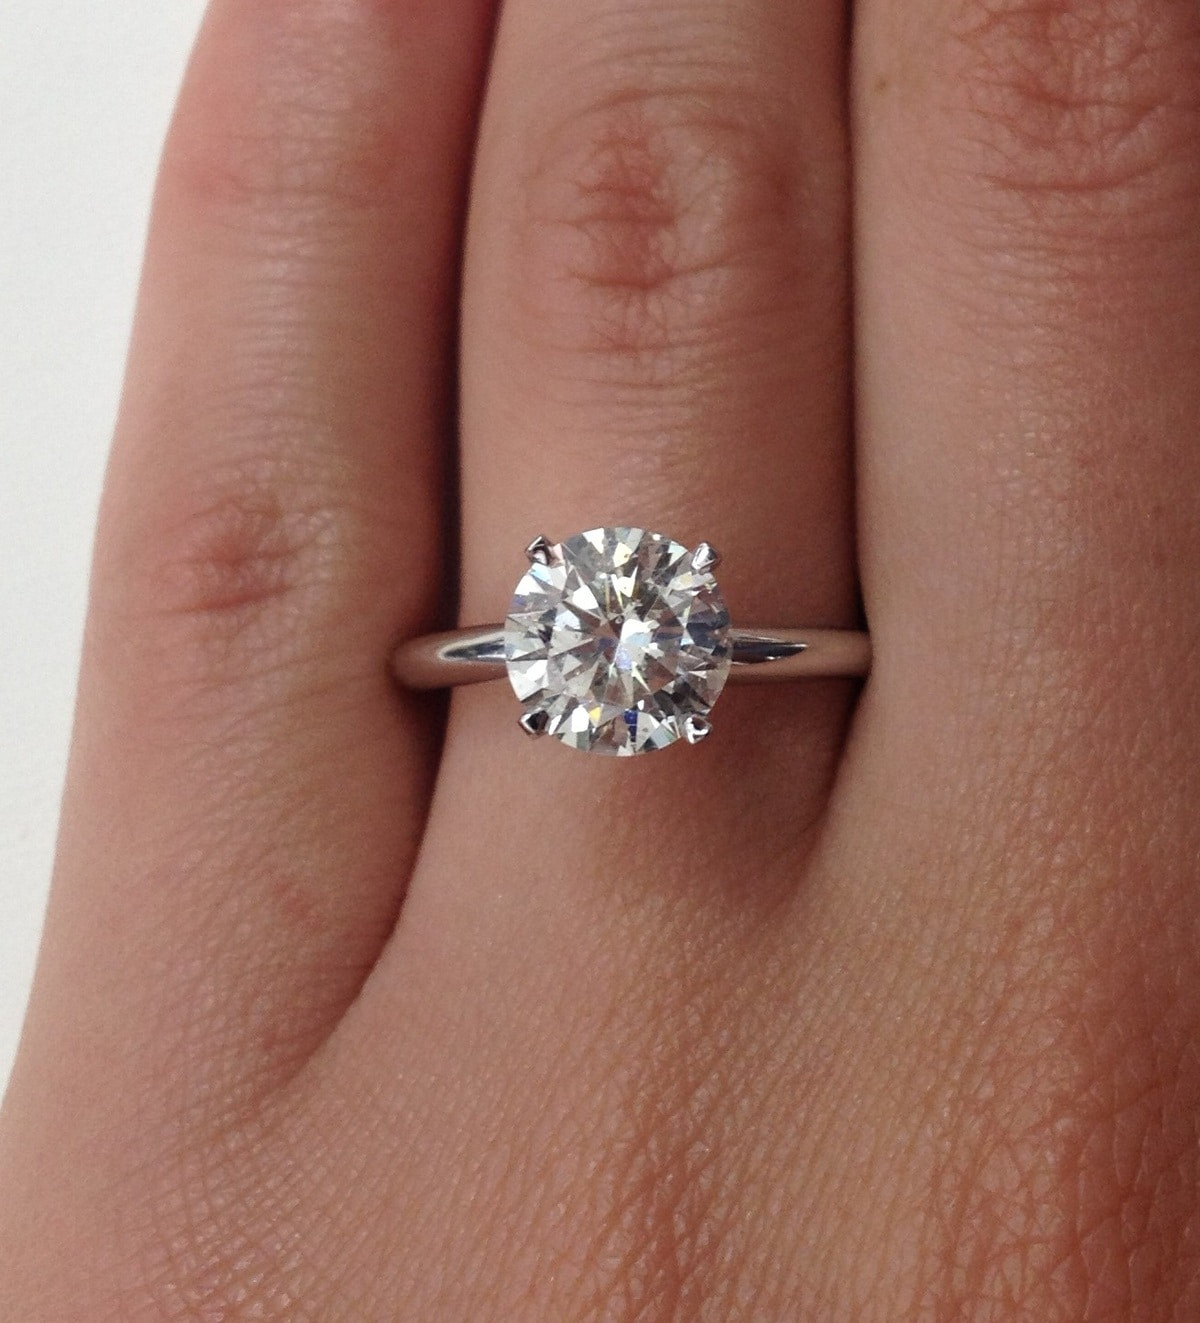 2 Carat Diamond Rings
 The Truth About a 2 Carat Diamond Engagement Ring